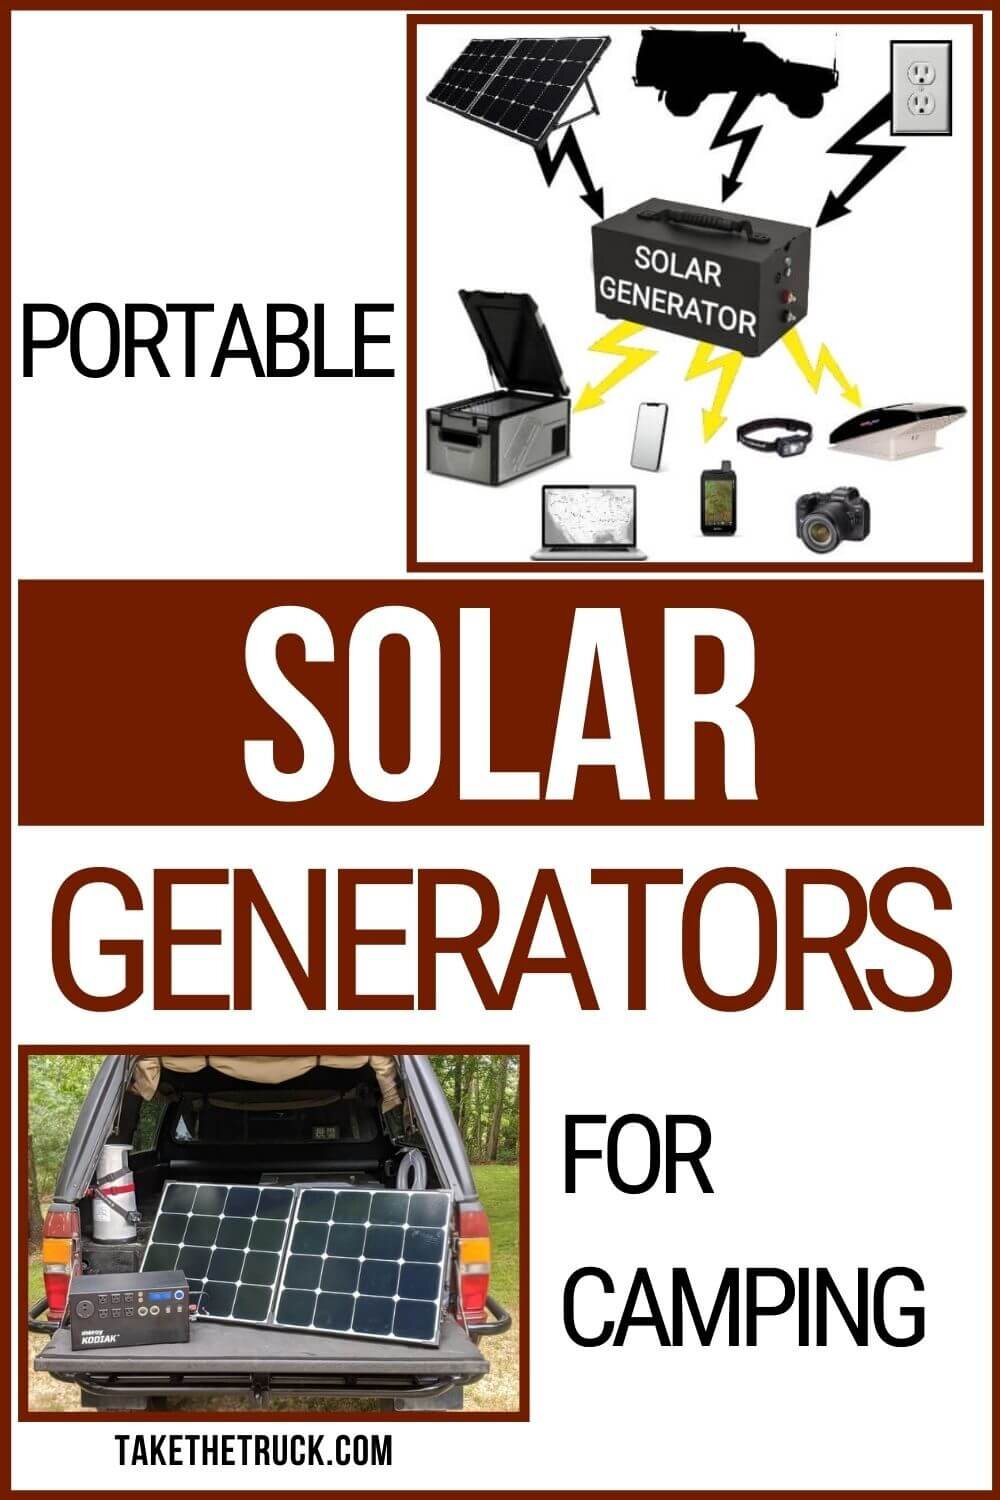 Learn about portable solar generators for camping. Camping solar power and overlanding solar power is easy to get with this post so you can figure out your solar power setup for camping off grid.